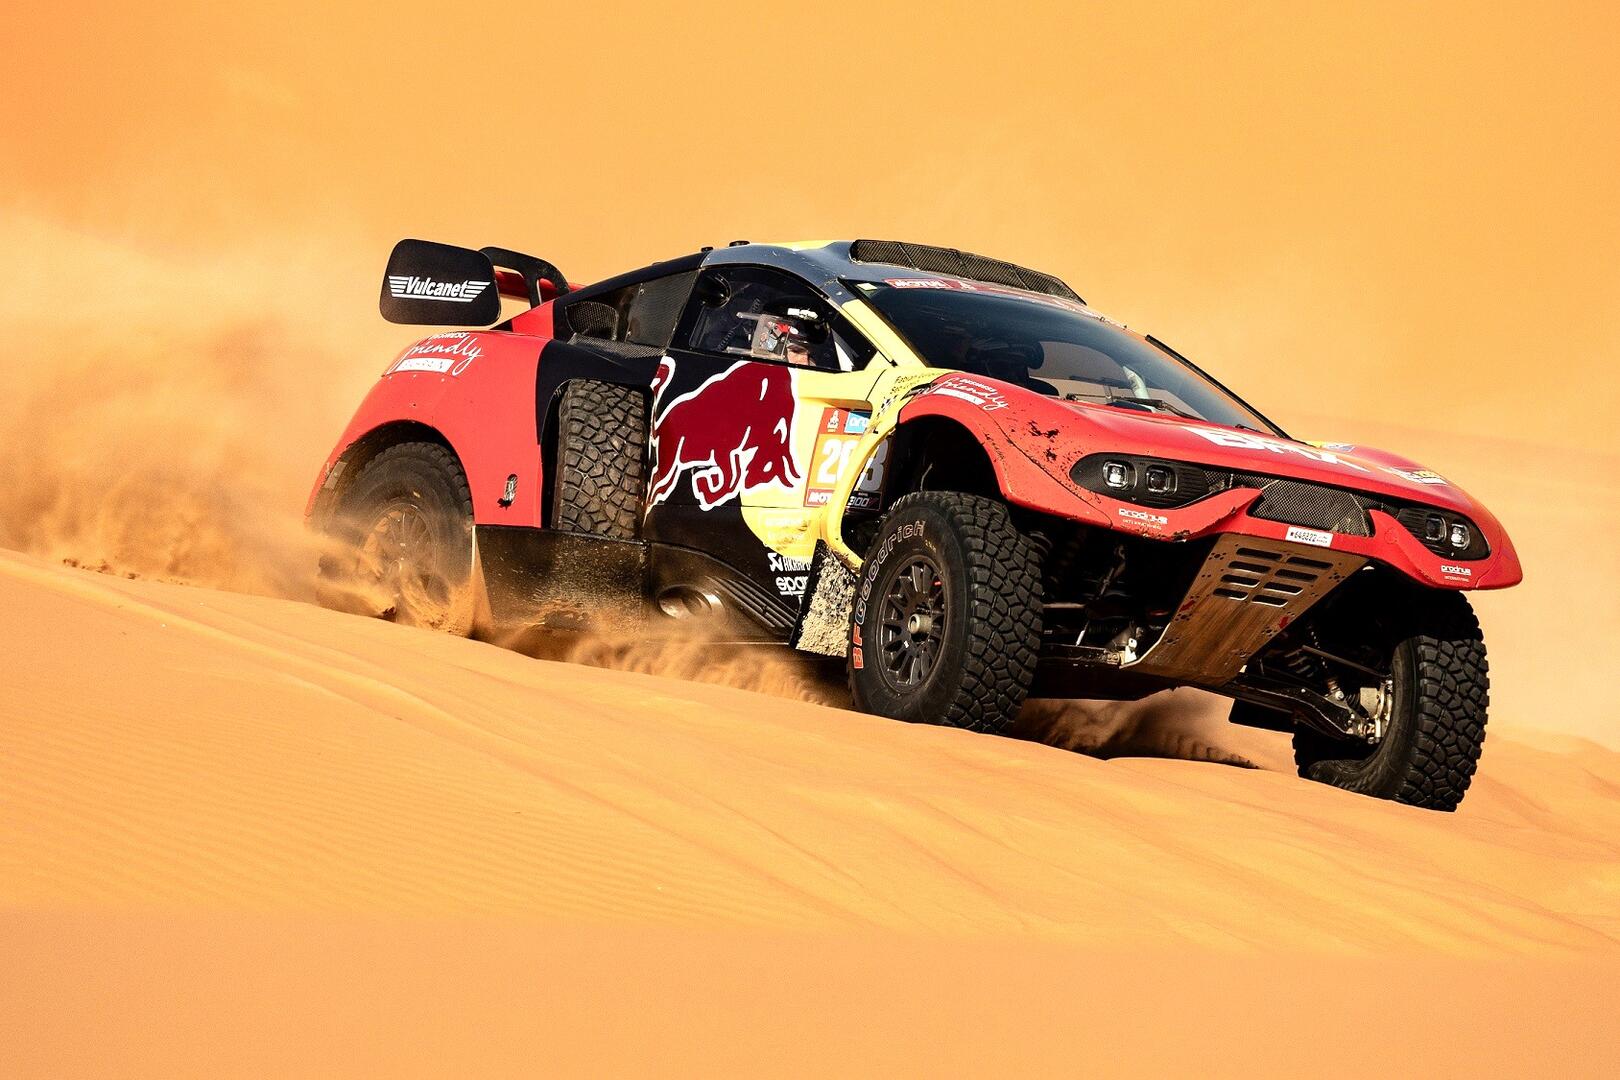 Loeb takes stage win to lift BRX again in Dakar Rally     Bahrain Raid Xtreme star outpaces leader Sainz as  Al Attiyah’s hat-trick hopes are shattered